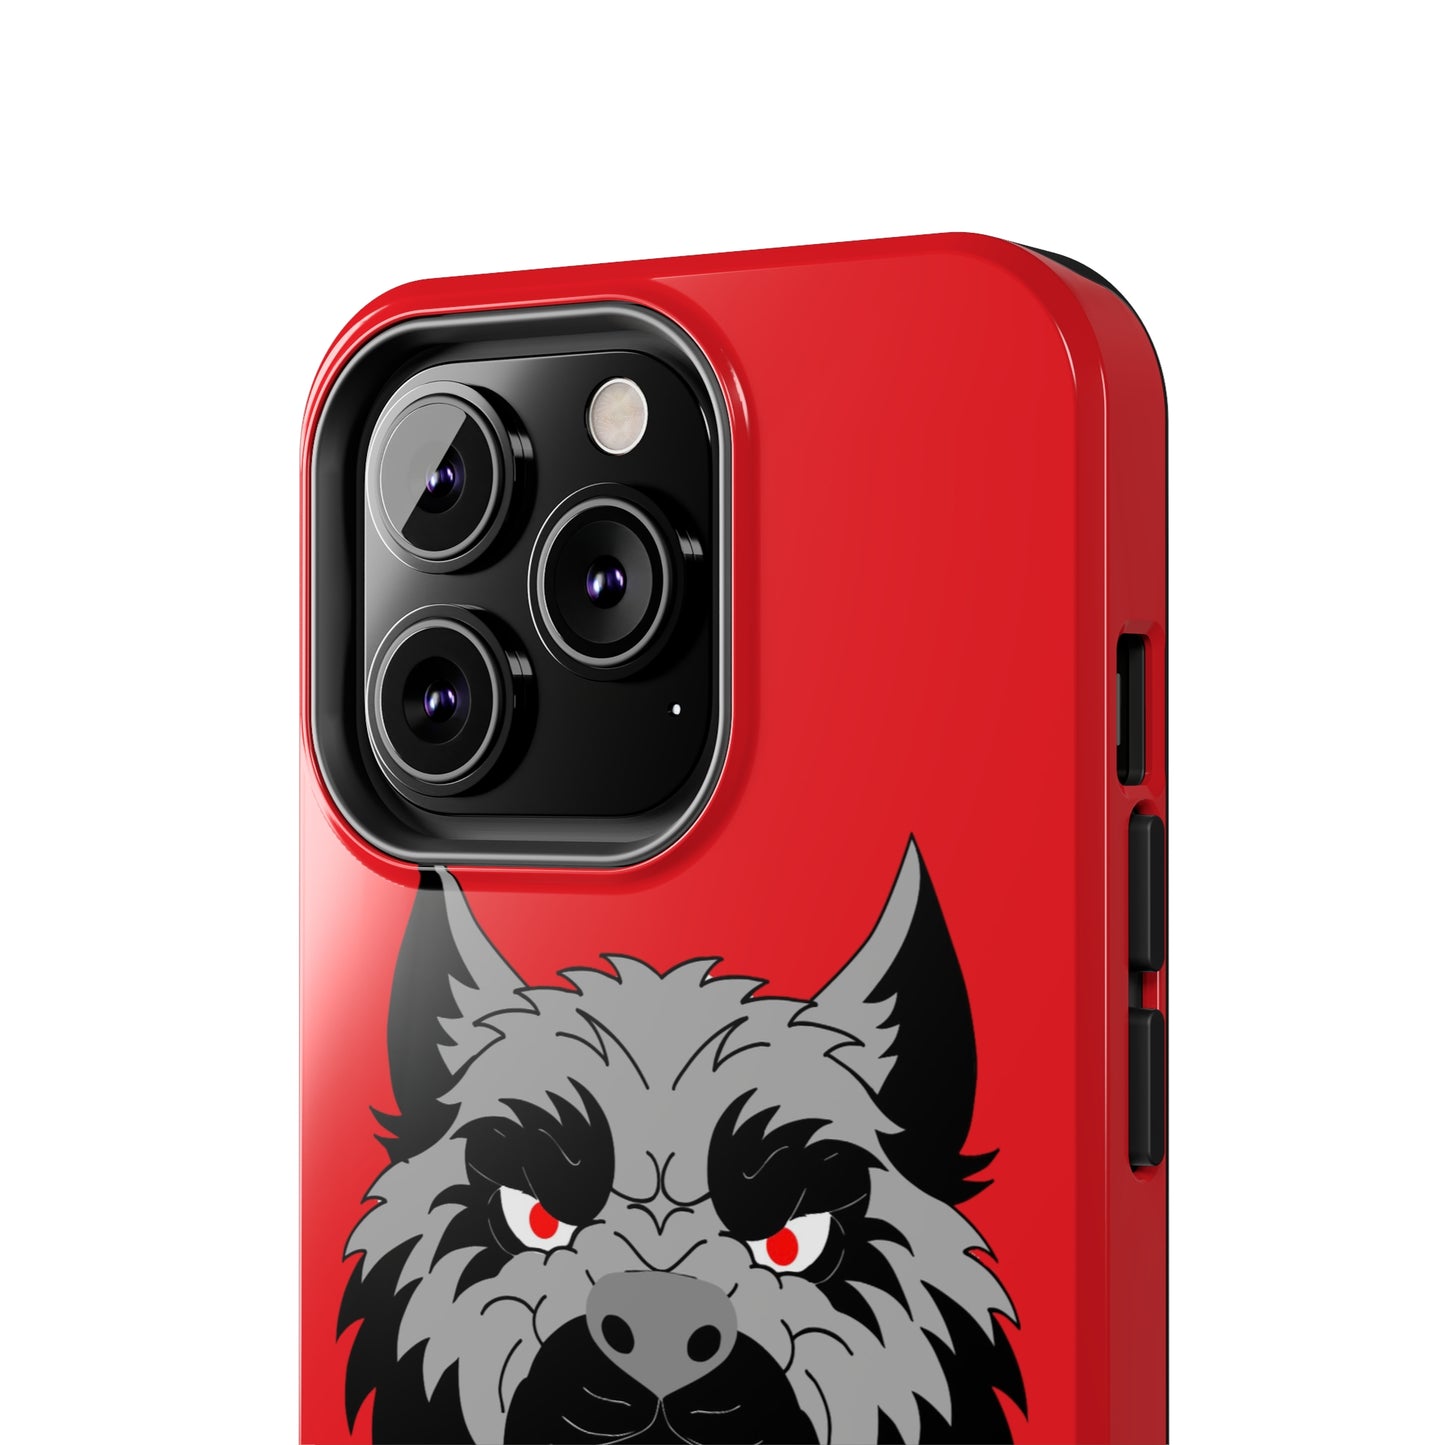 Wolfs InkTherapy Tough Phone Cases